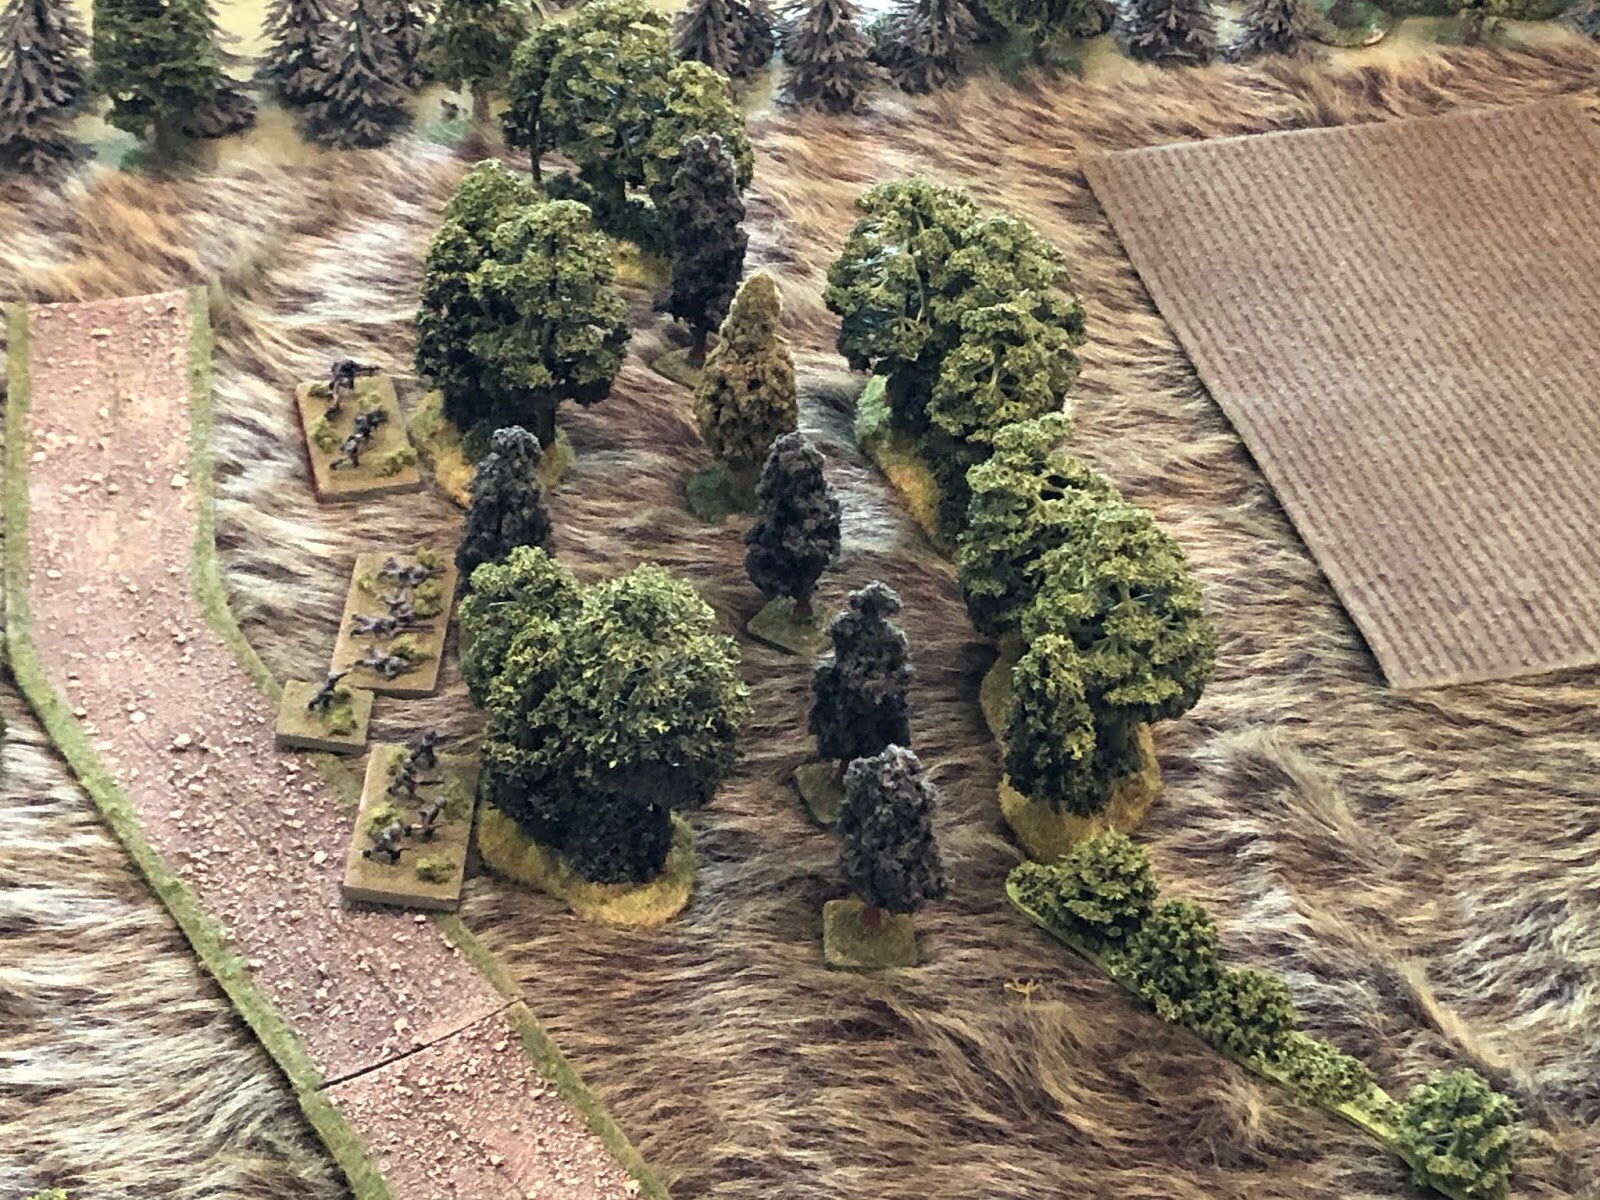  1st Platoon in the North Wood.  This is a hasty defense, so no one is dug in, just hasty scrapes making the best use of terrain.  You can see what I was talking about with the 'reveres-slope' defense concept; the Soviets will have to come through, o